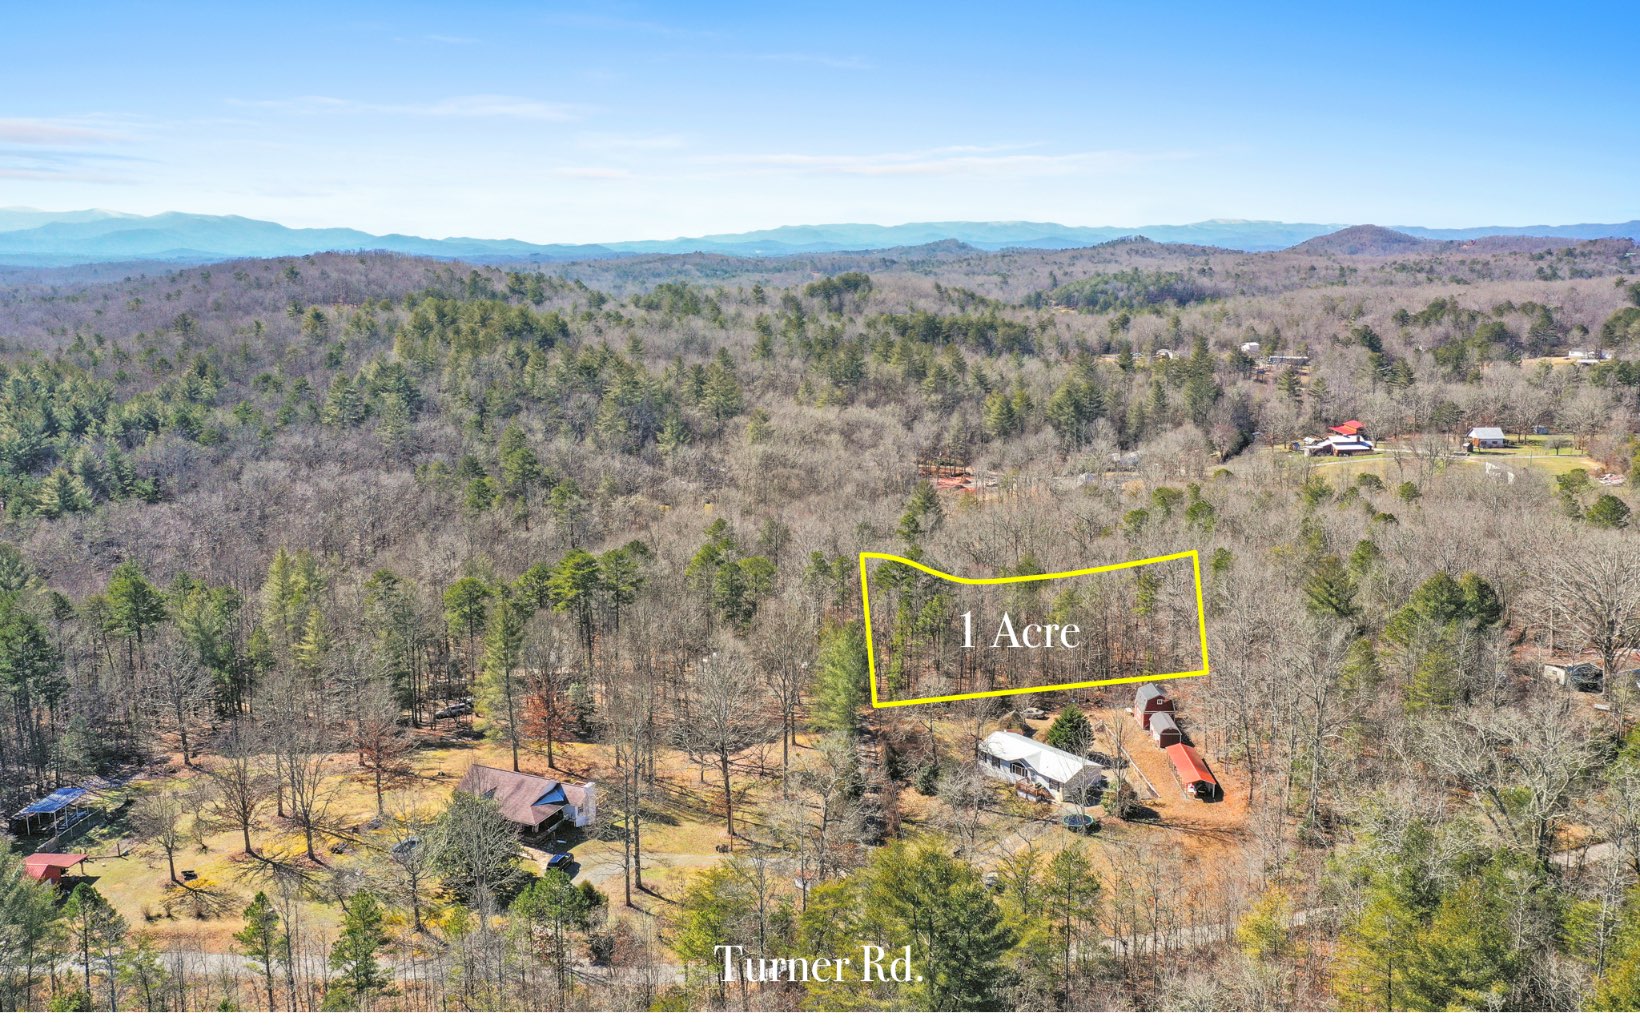 Conveniently tucked away between the beautiful mountain towns of Blue Ridge, Mineral Bluff, Blairsville and Murphy, NC.This 1 Acre Level lot is perfect to build that new homestead.